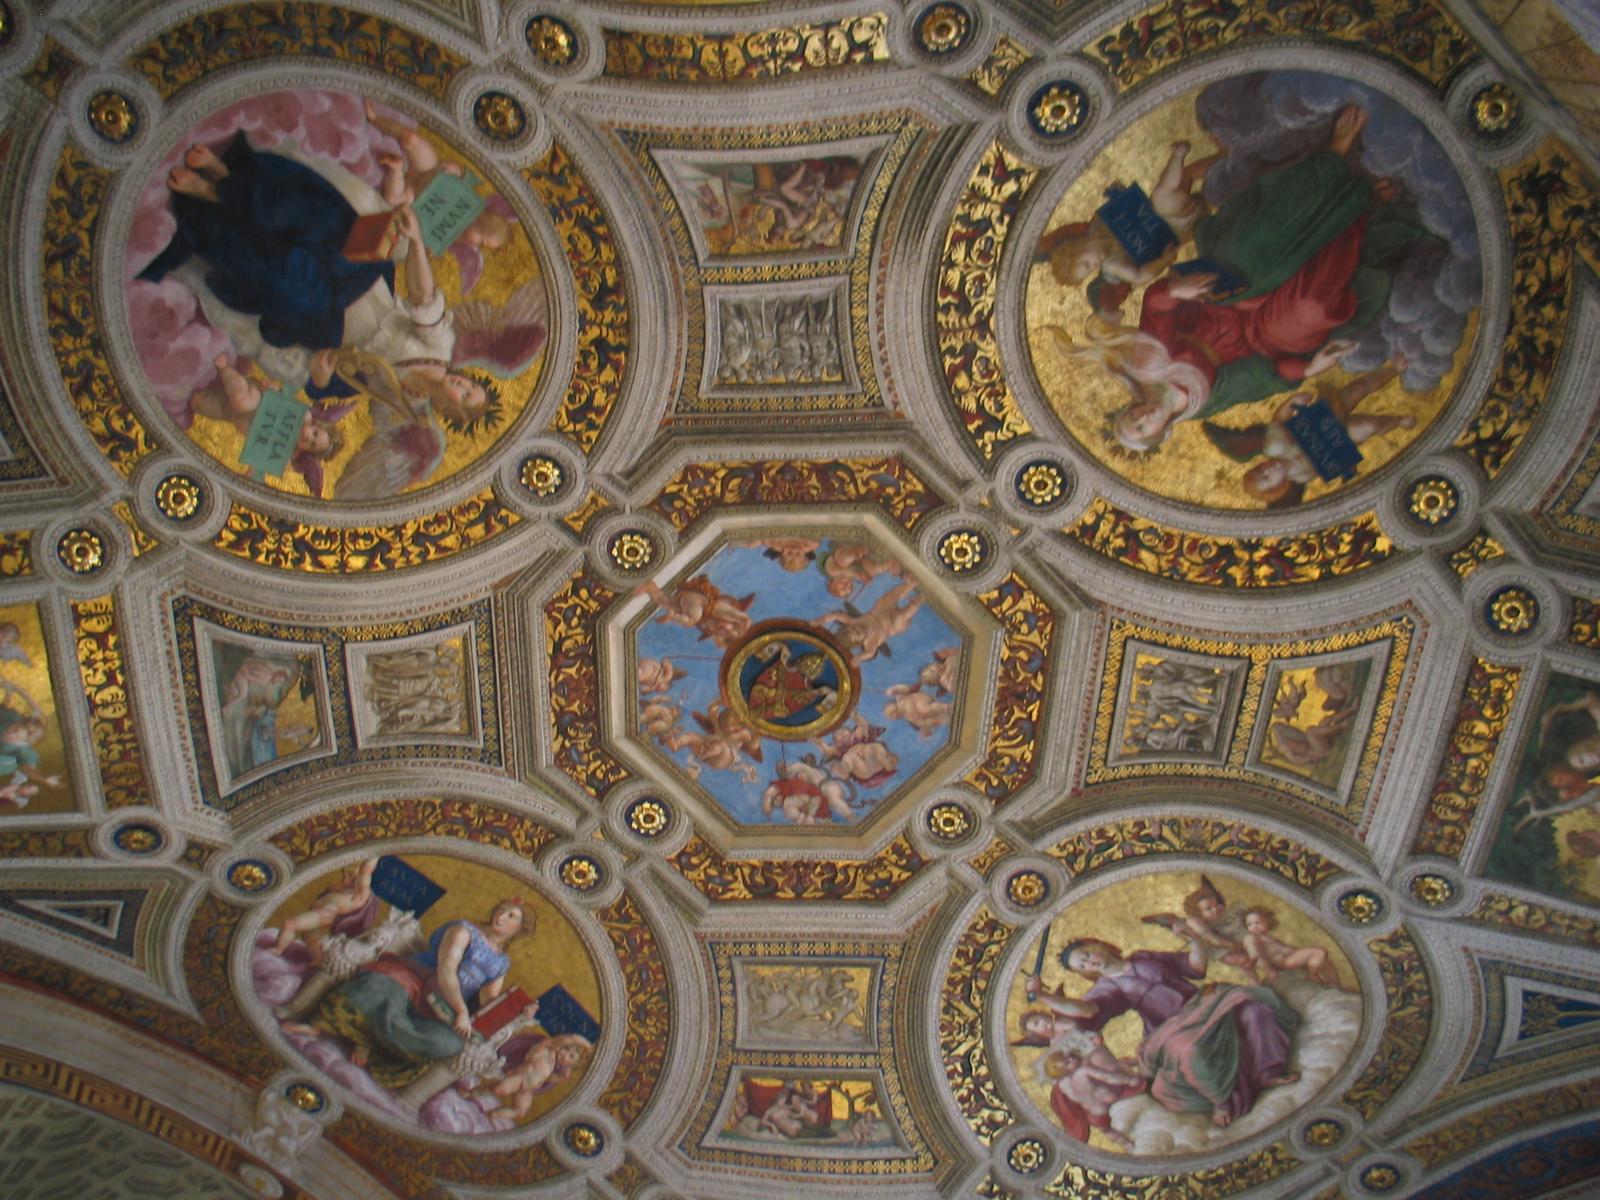 A ceiling in the Vatican museum